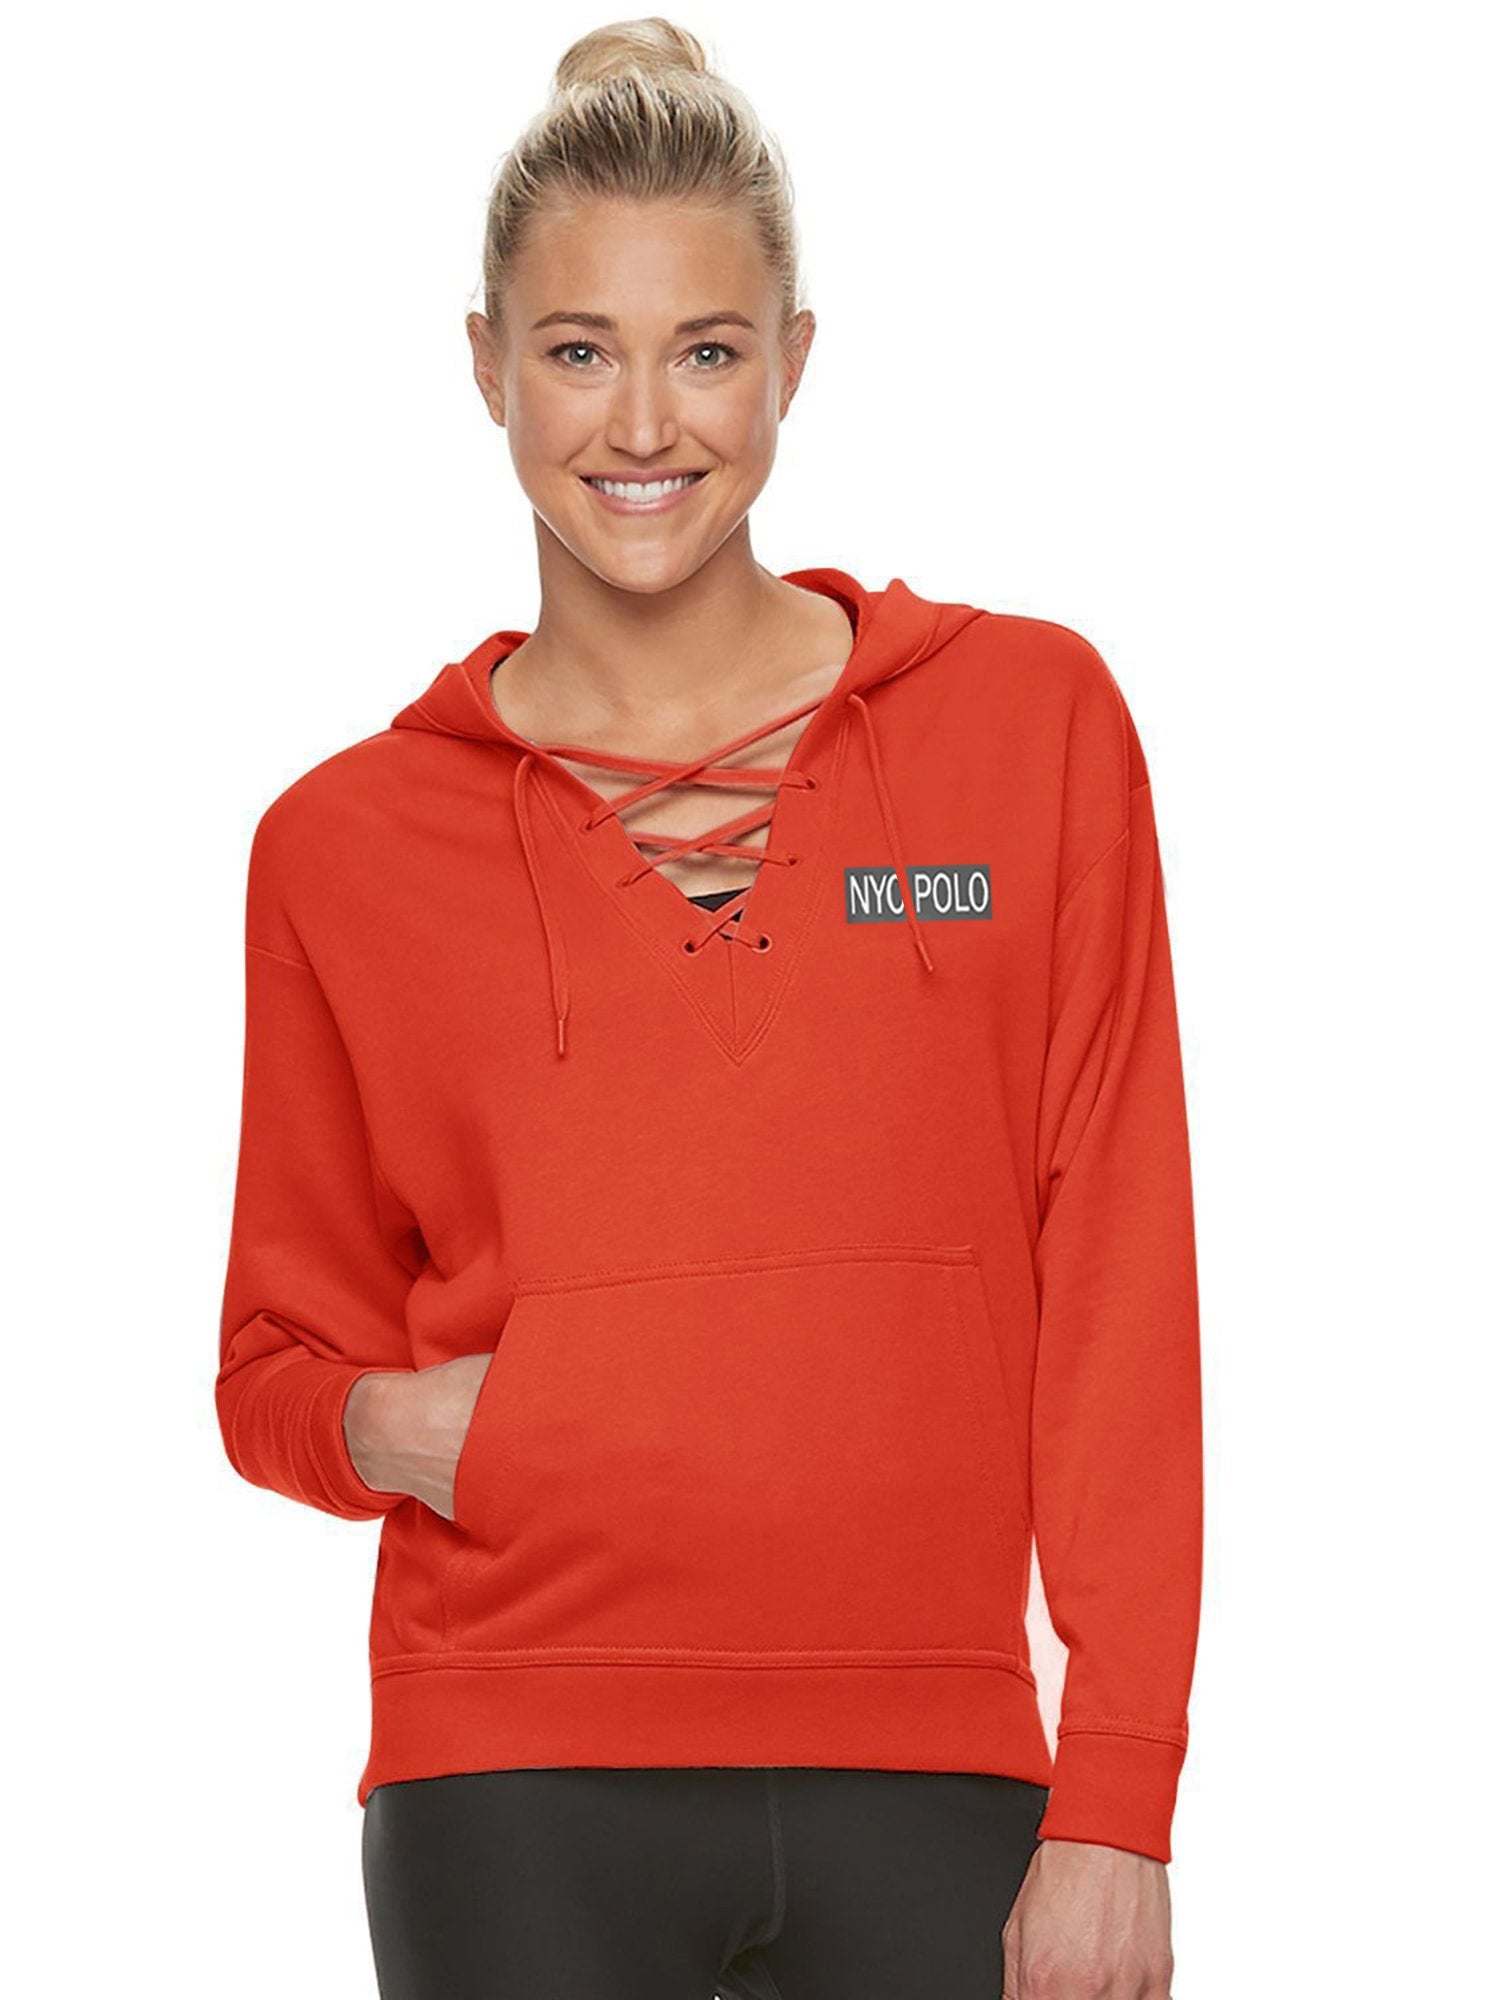 Nyc Polo Terry Fleece Lace Up Hoodie For Ladies-Orange-SP1497